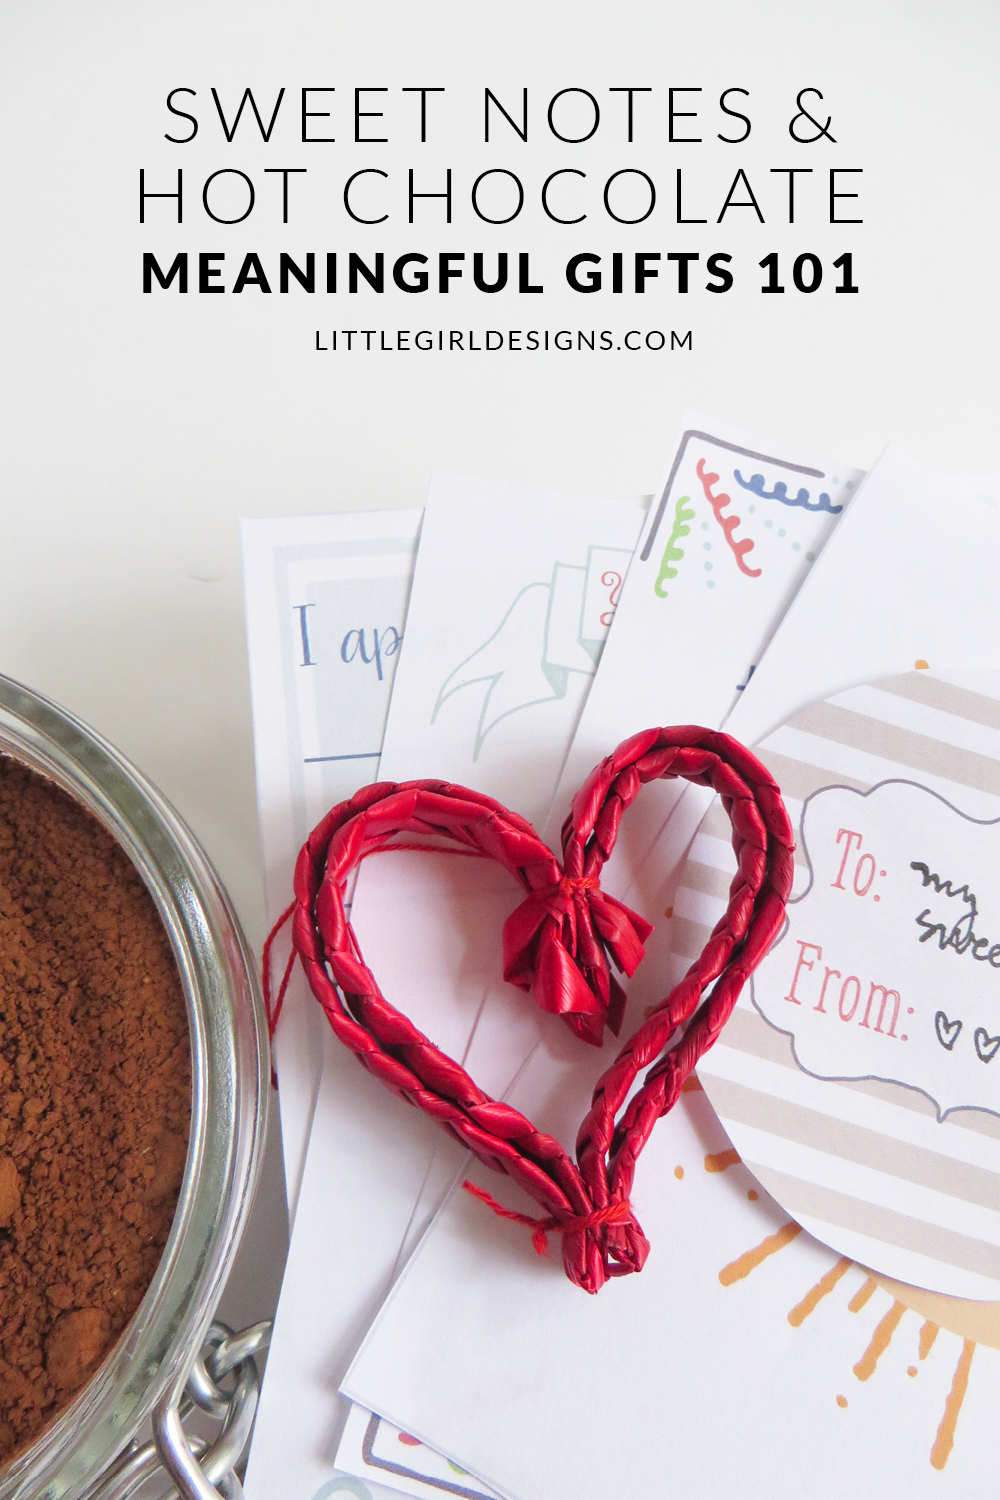 Sweet Notes & Hot Chocolate – Meaningful Gifts 101